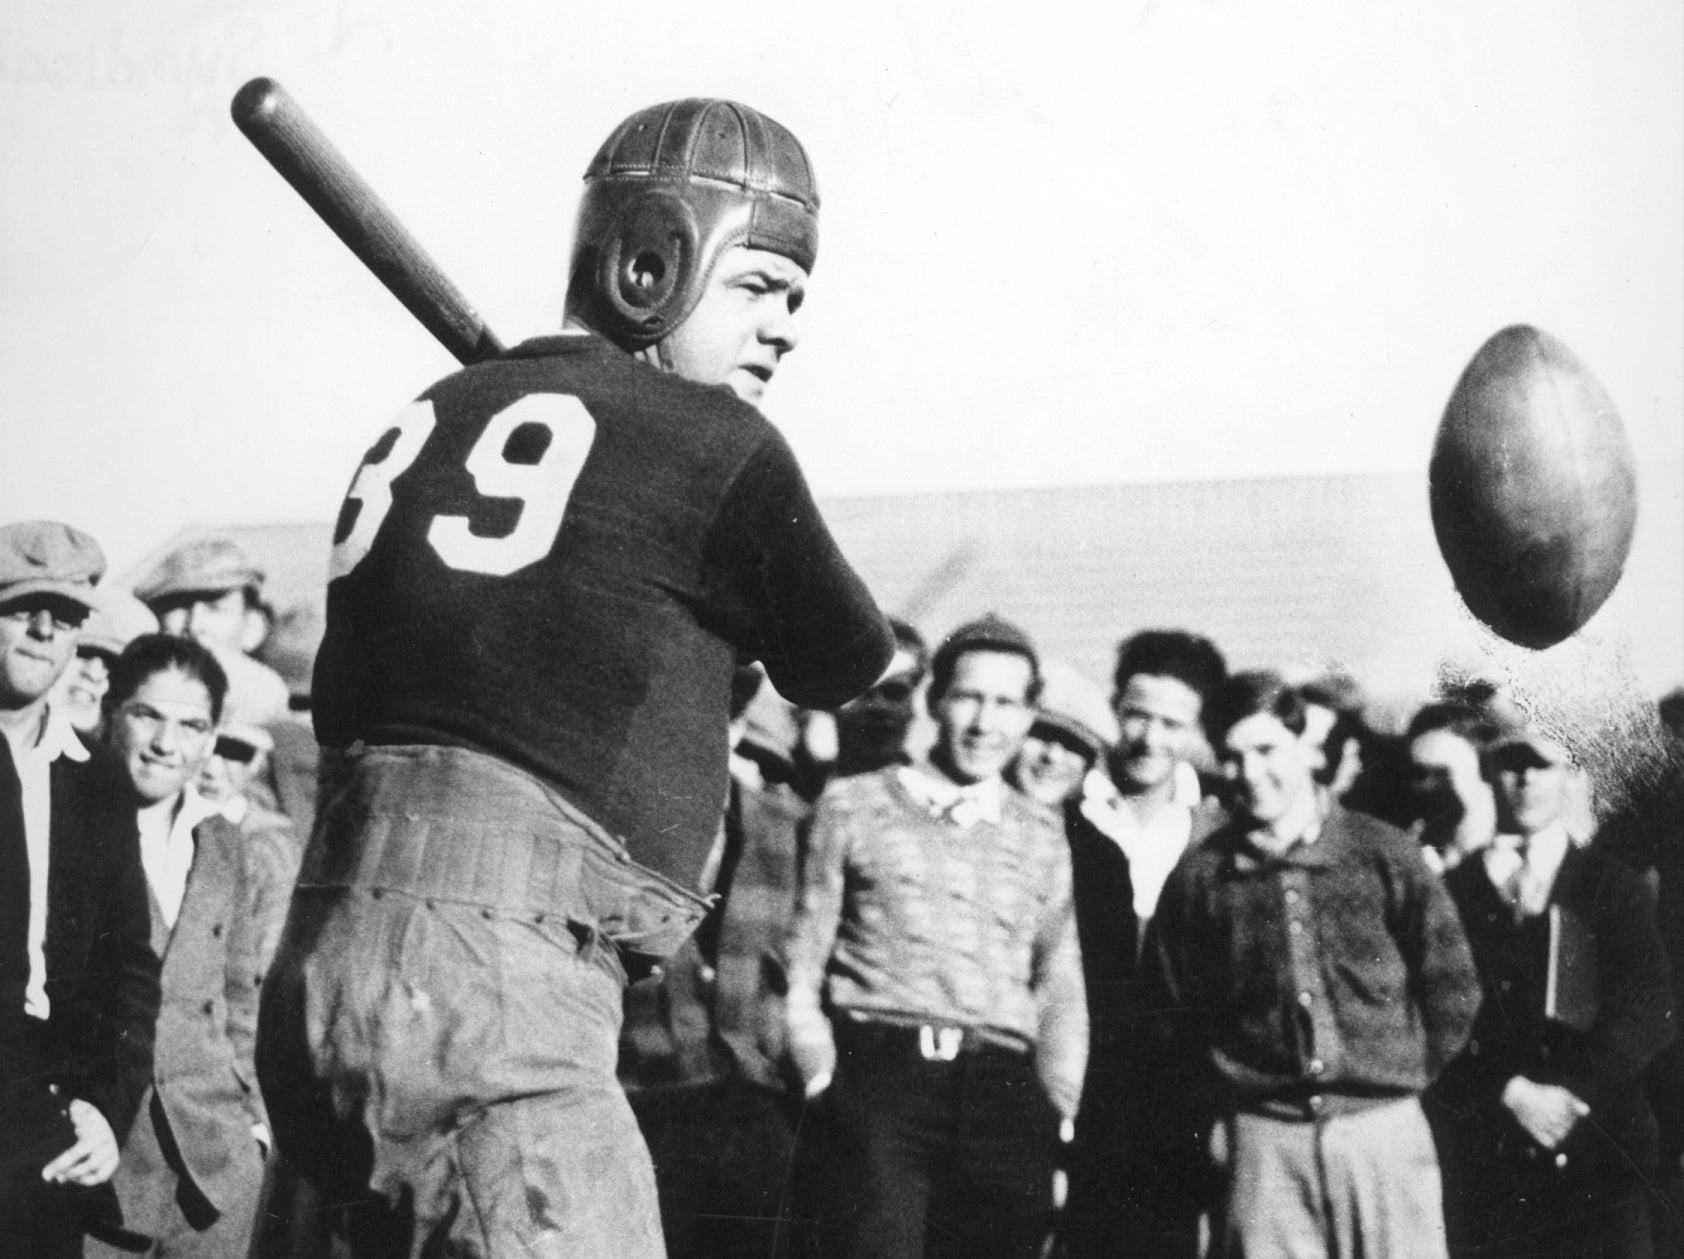 Baseball & Football Have Long Been Connected